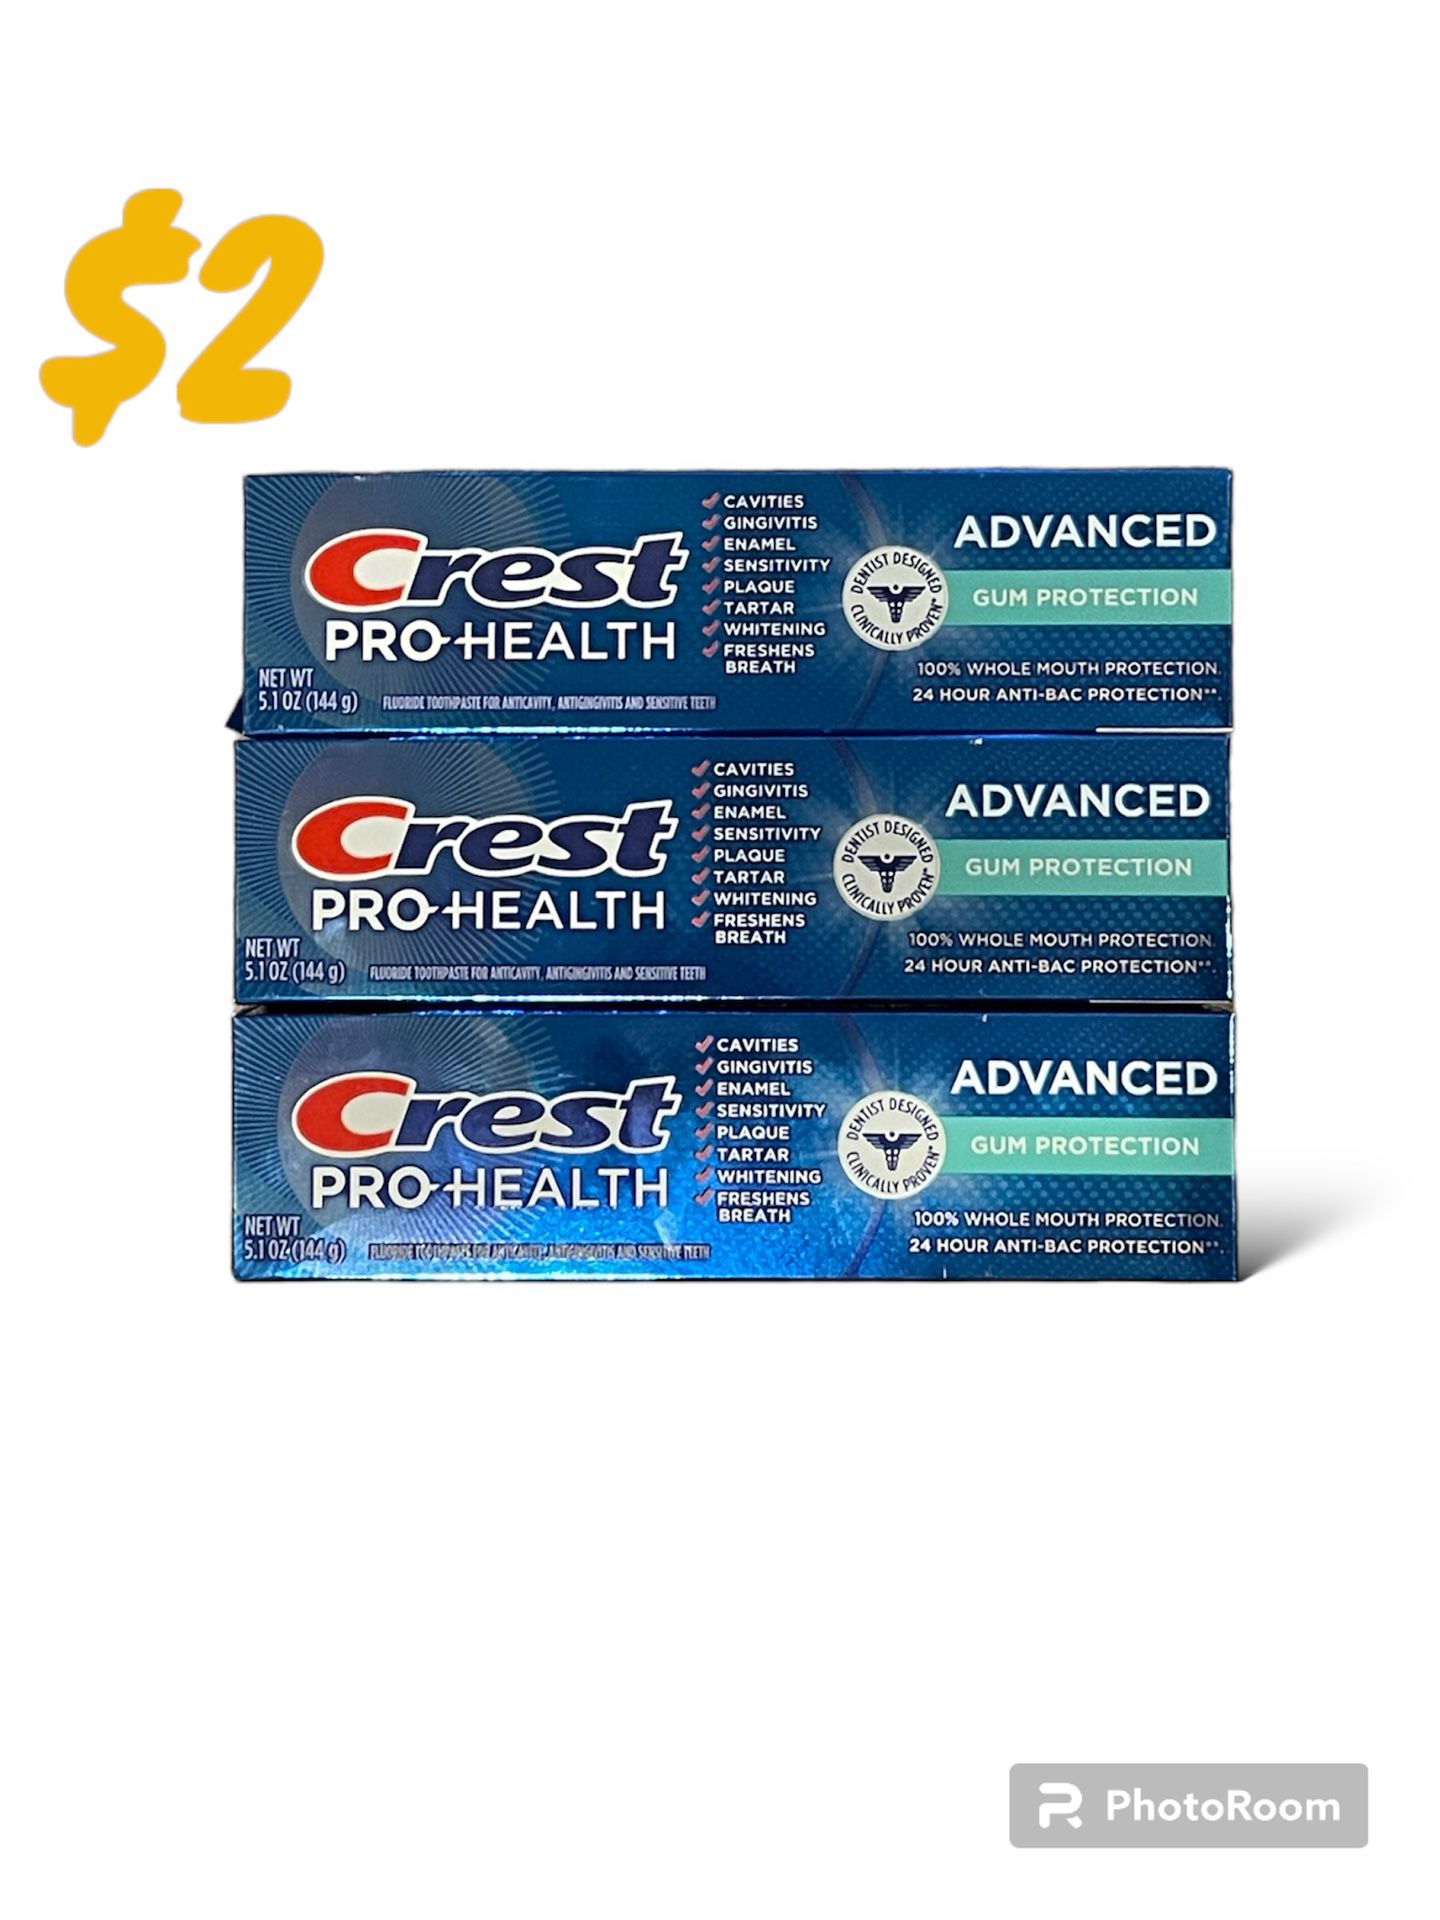 【NEW】Crest Pro Health Toothpaste Gum Protection 